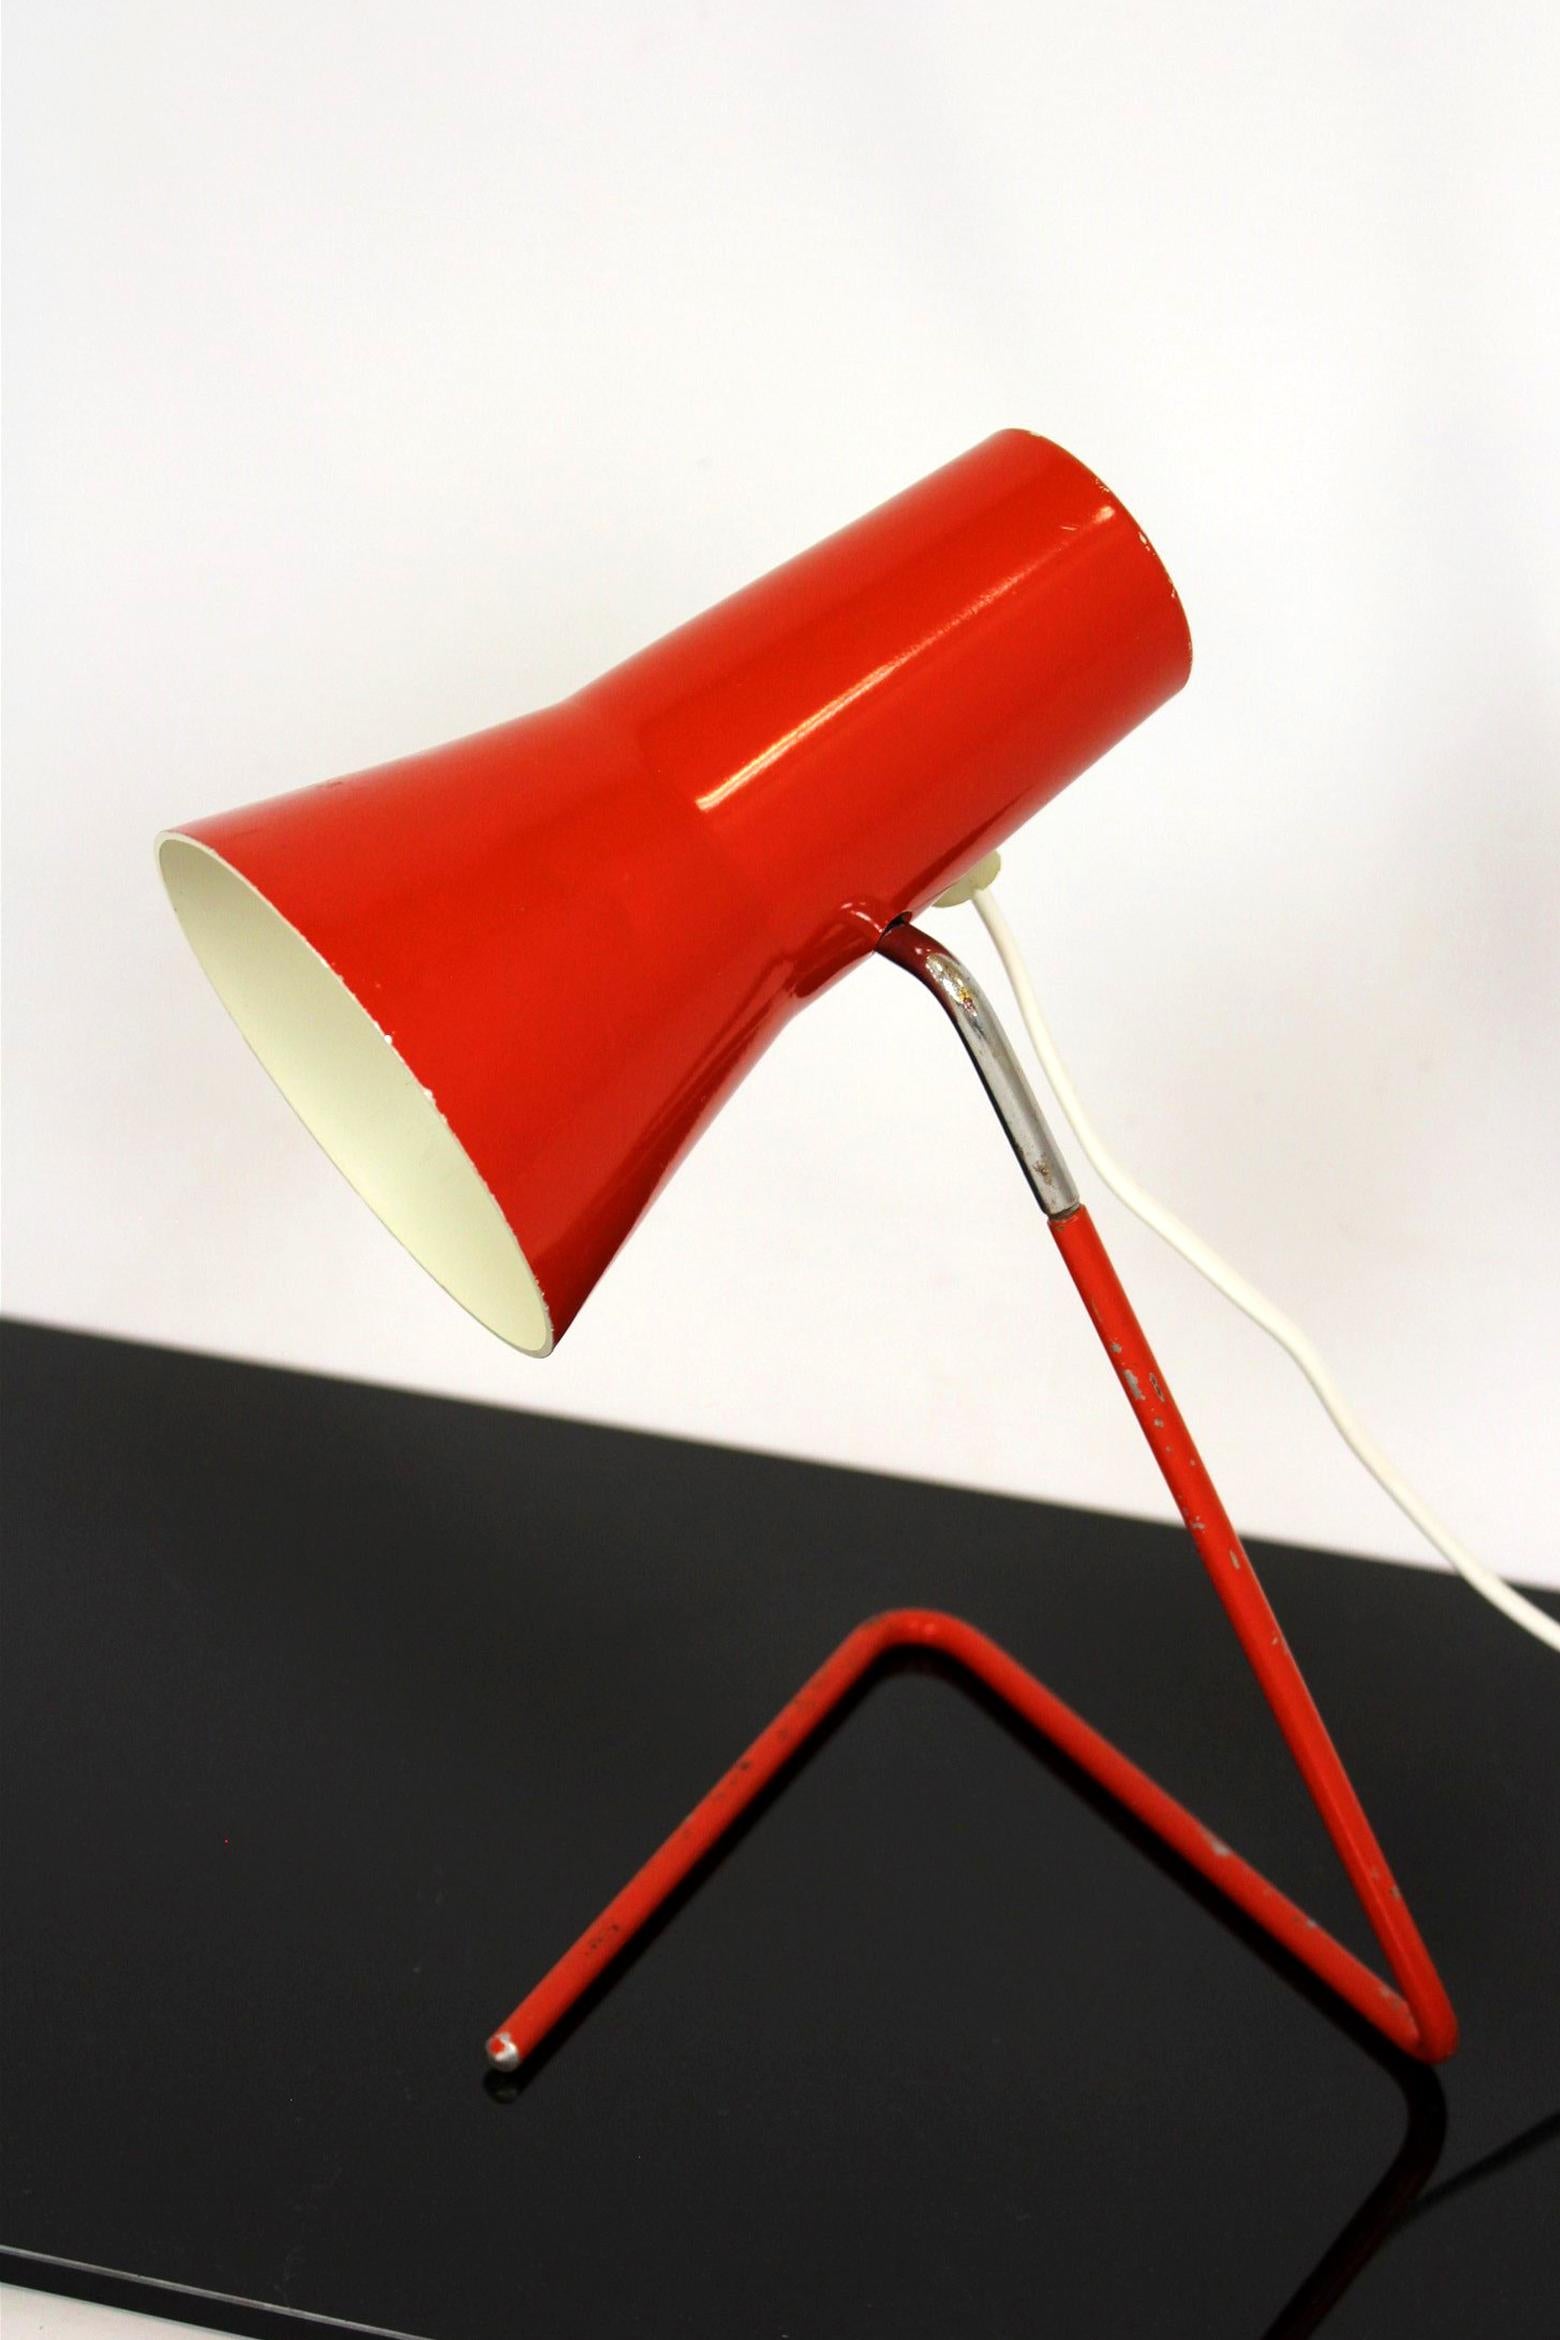 
This red table lamp was manufactured by Drupol and designed by Josef Hurka in the mid 1960s. Original, good condition, fully functional. The wire has been replaced with a new one.